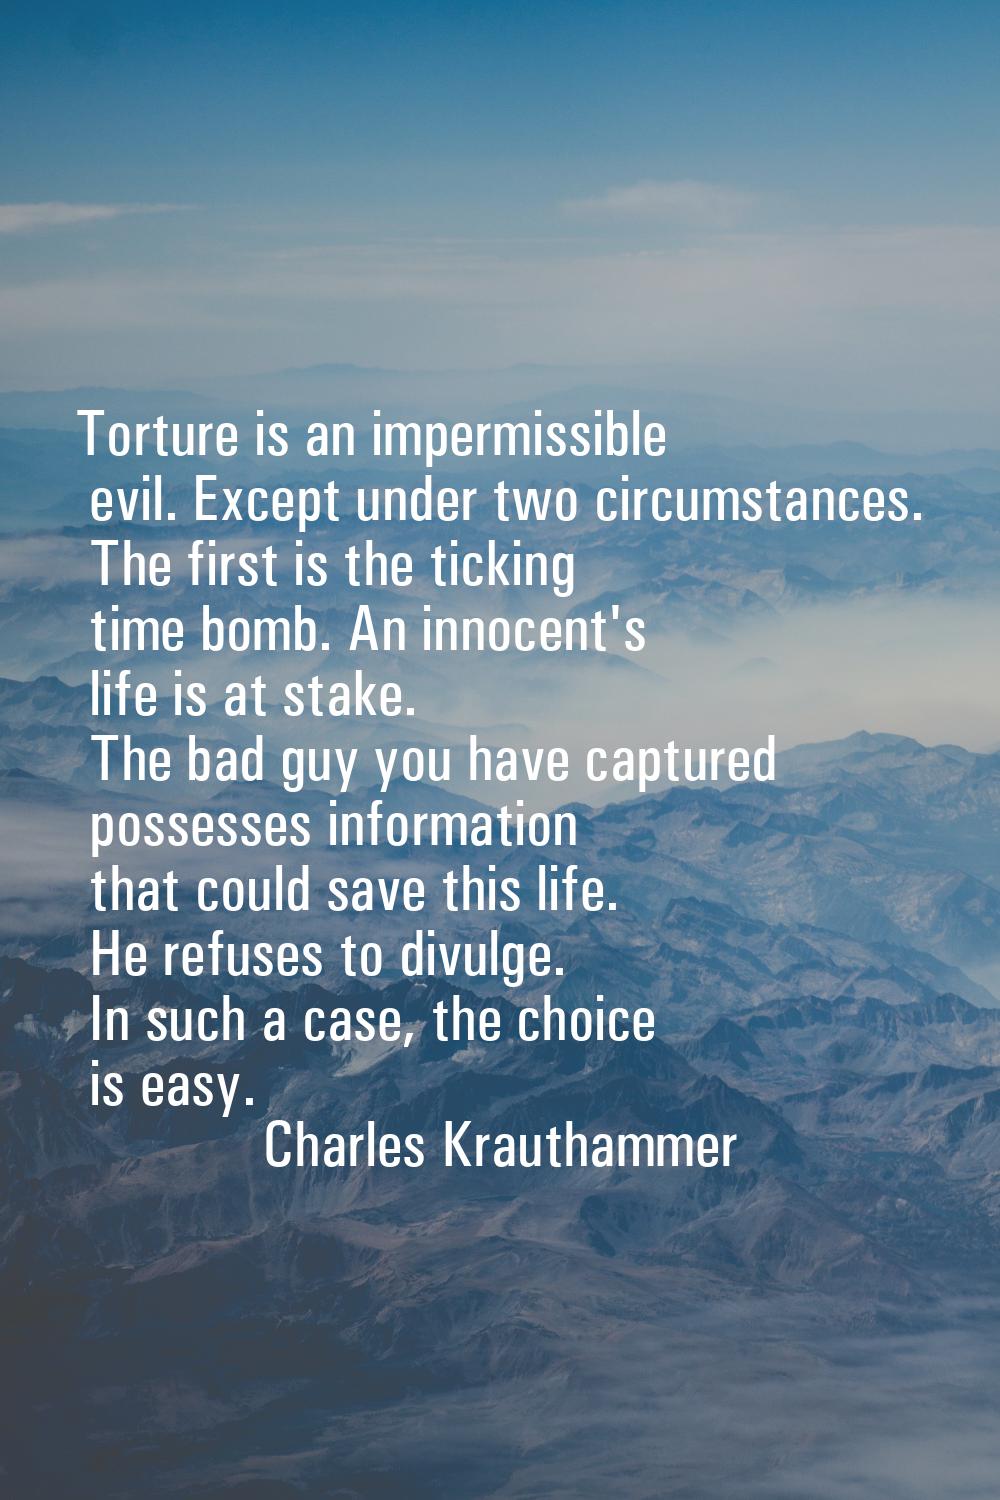 Torture is an impermissible evil. Except under two circumstances. The first is the ticking time bom